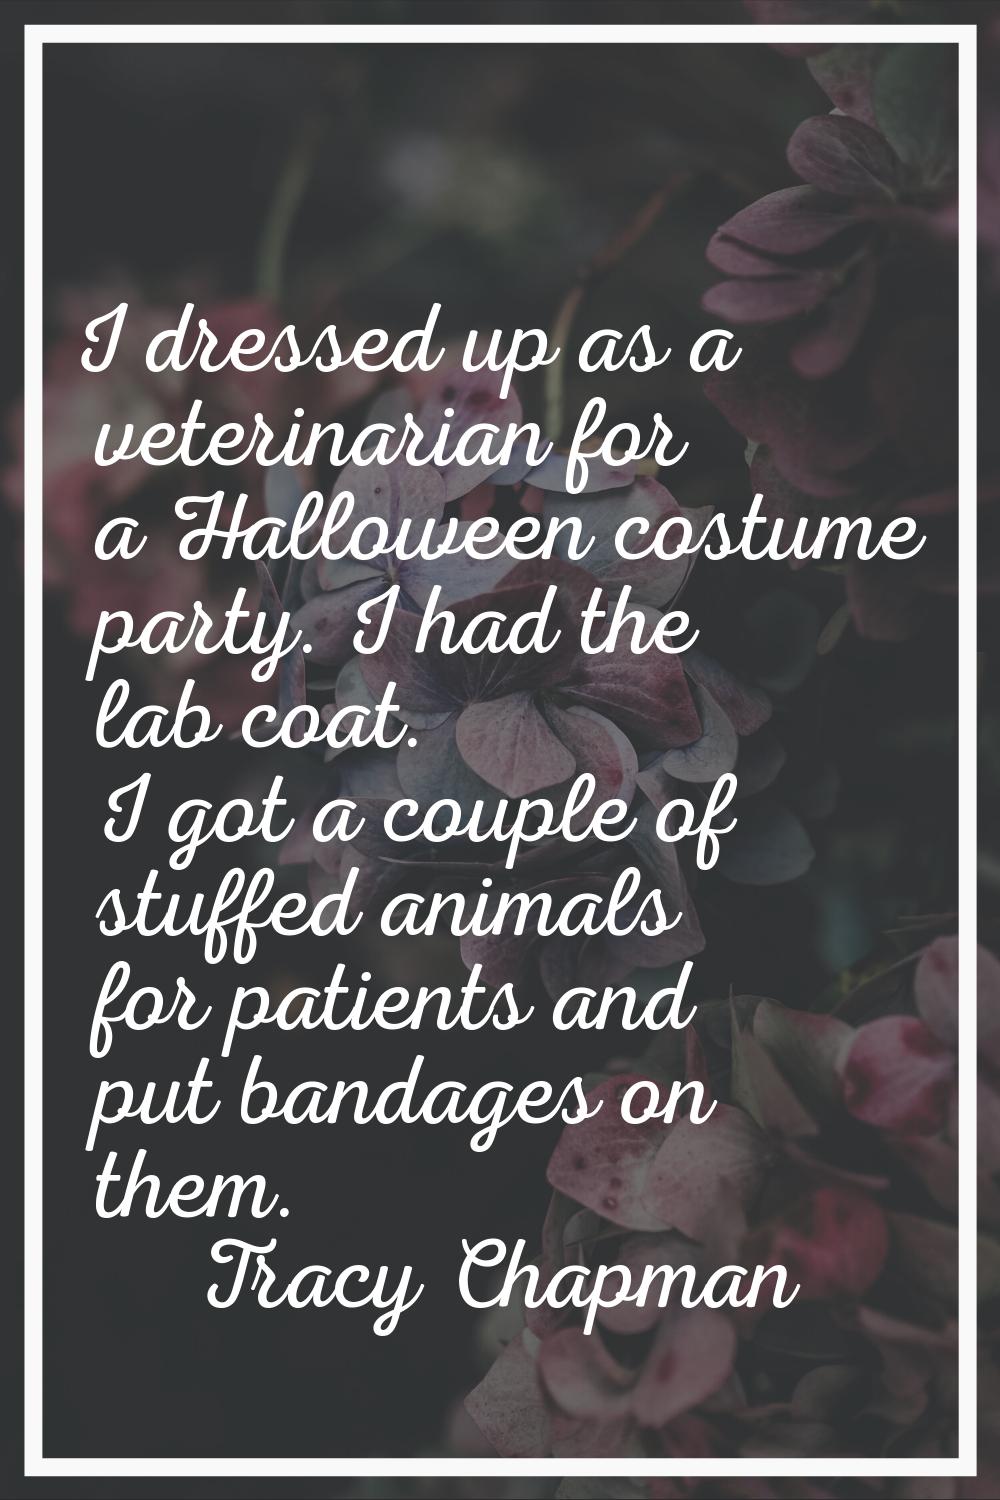 I dressed up as a veterinarian for a Halloween costume party. I had the lab coat. I got a couple of